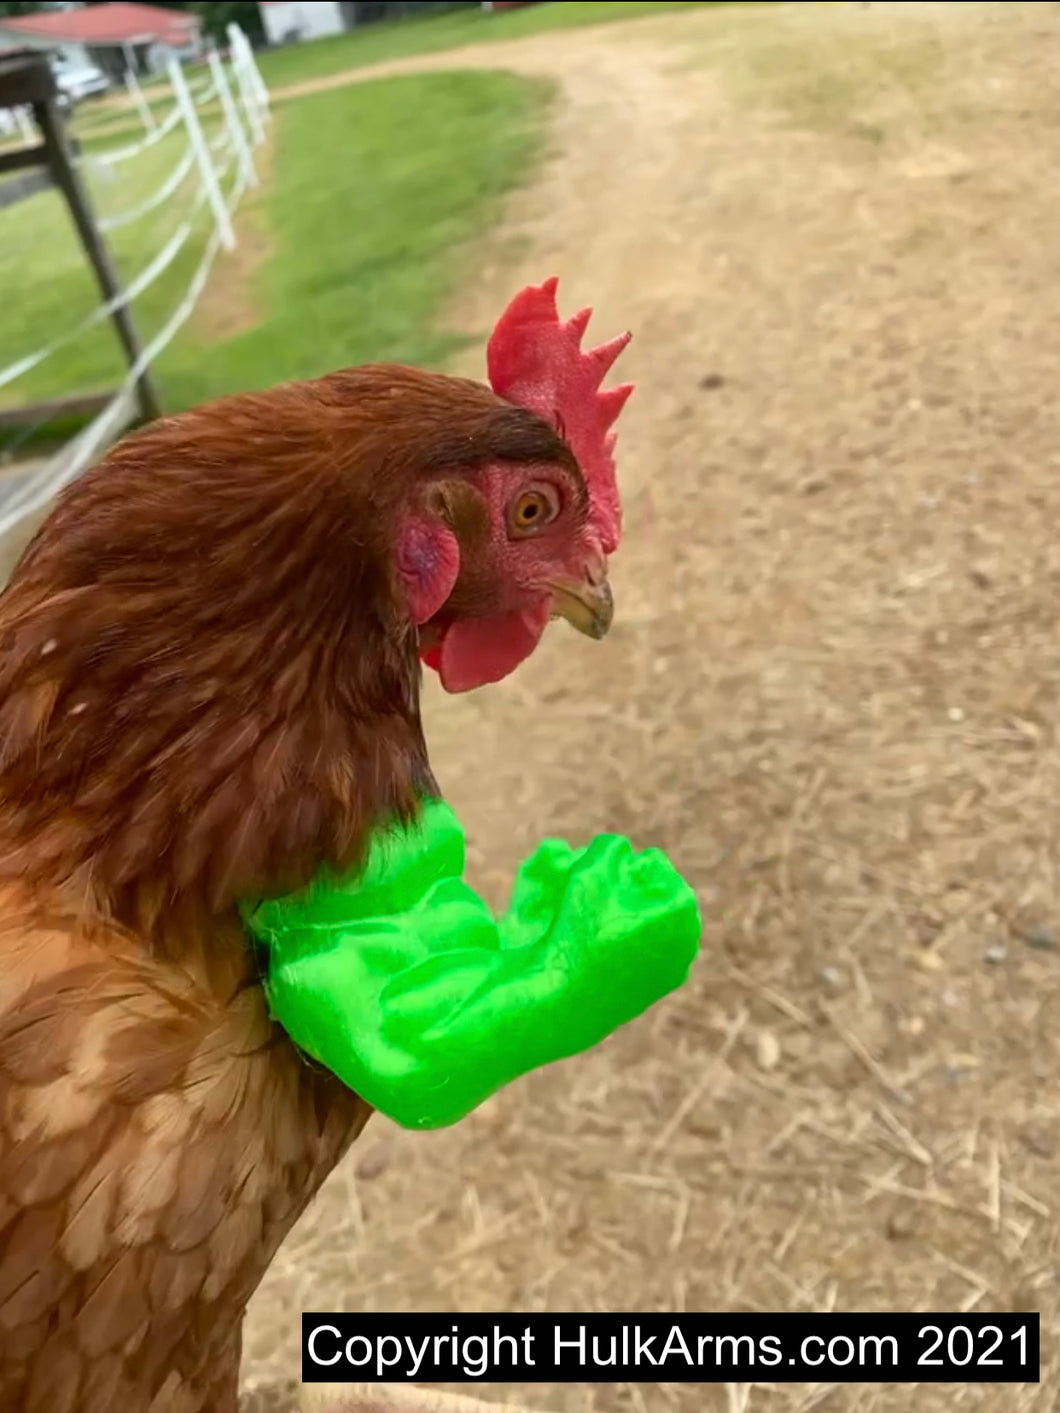 3D Printed Arms For Chickens?